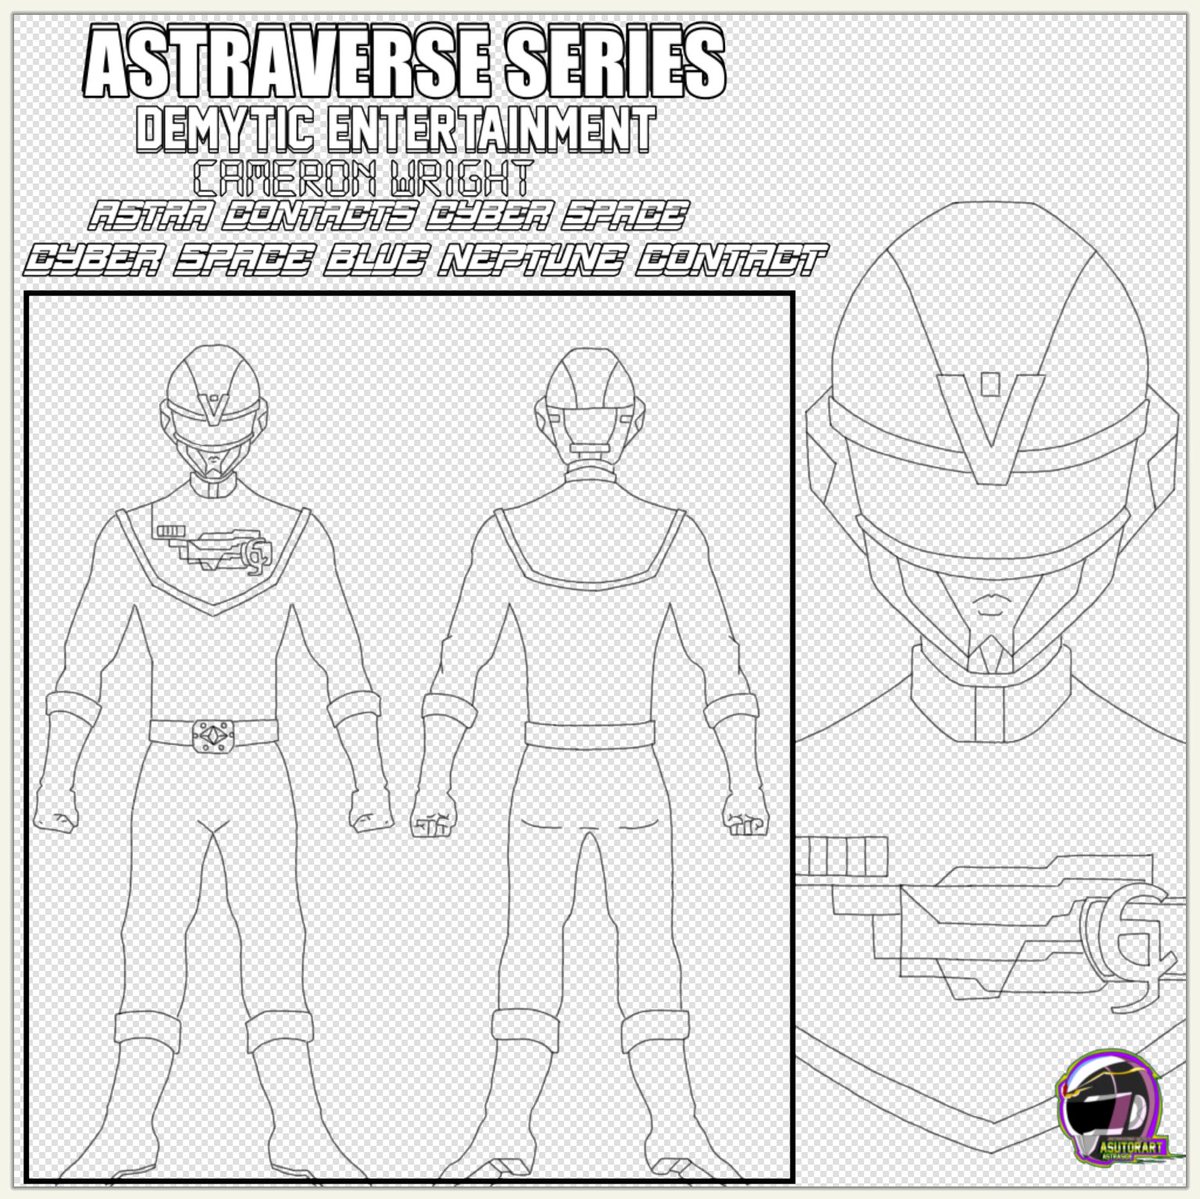 WORKIN ON CAMERON WRIGHT : CYBER SPACE BLUE NEPTUNE CONTACT.
#AstraContactSeries #astraverseseries #powerrangers #mmpr #blueranger